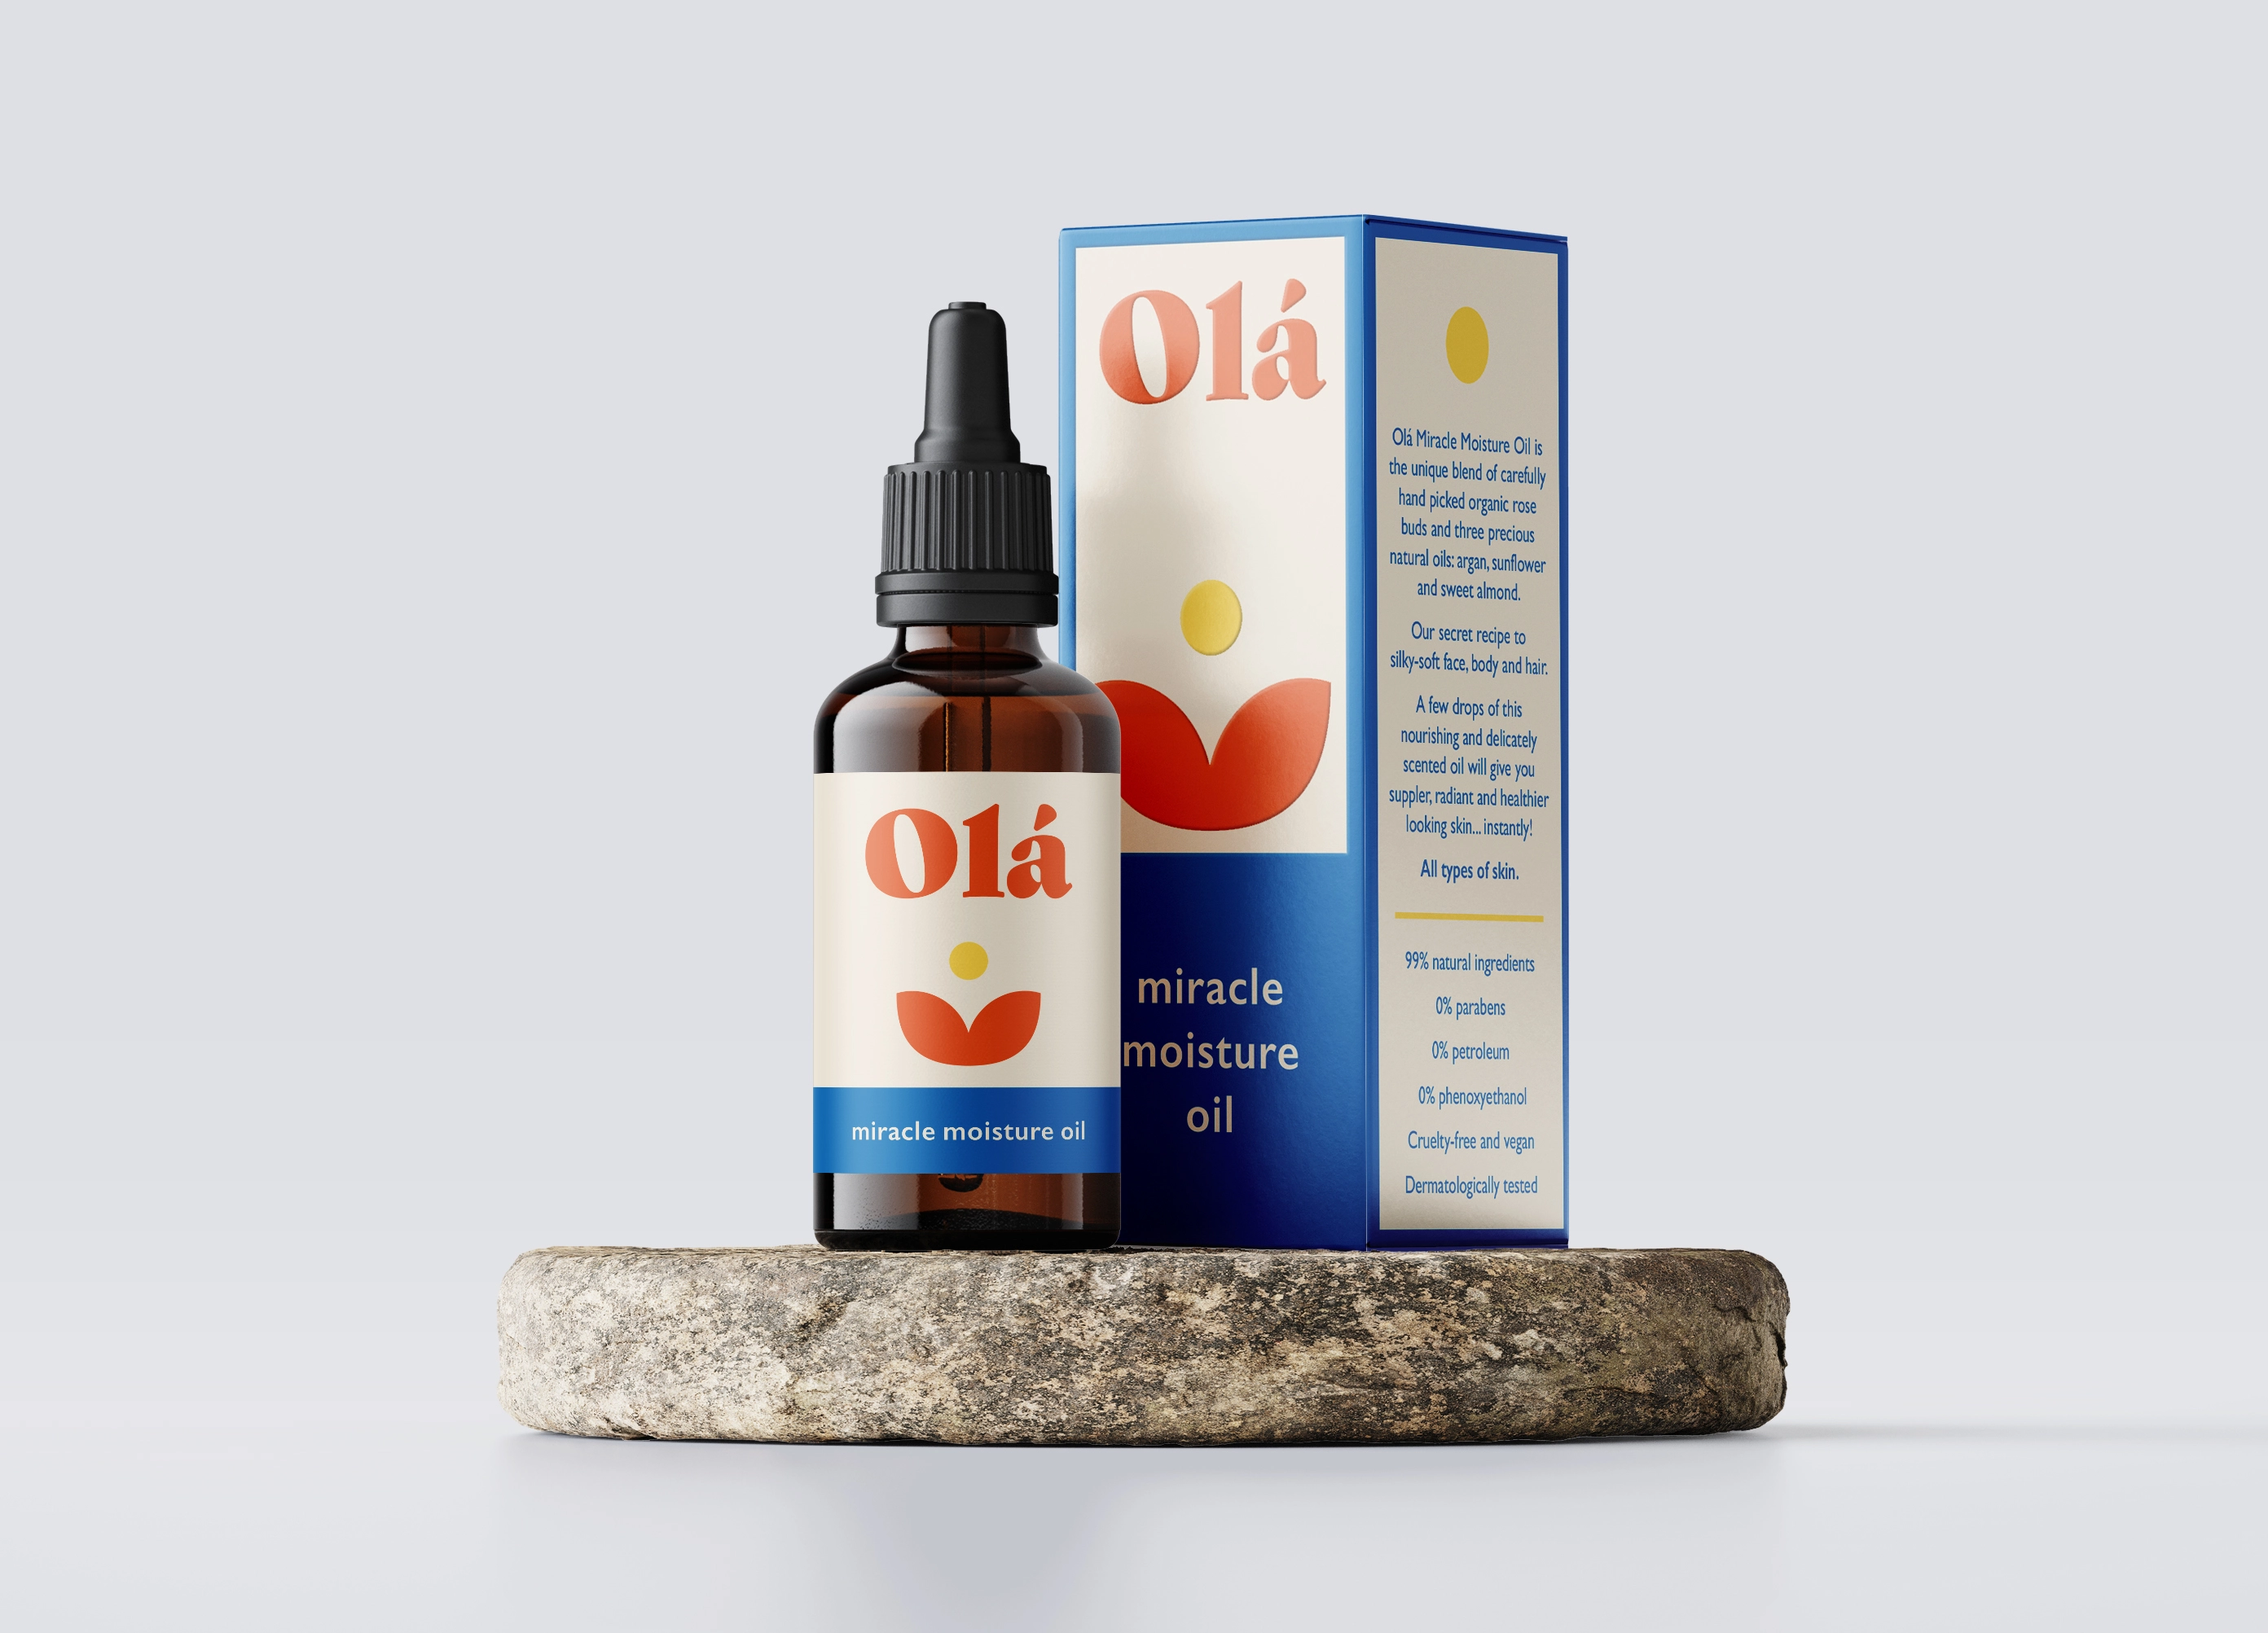 a dropper bottle and box image of the colourful Ola Miracle Moisture Oil packaging sitting on a round stone